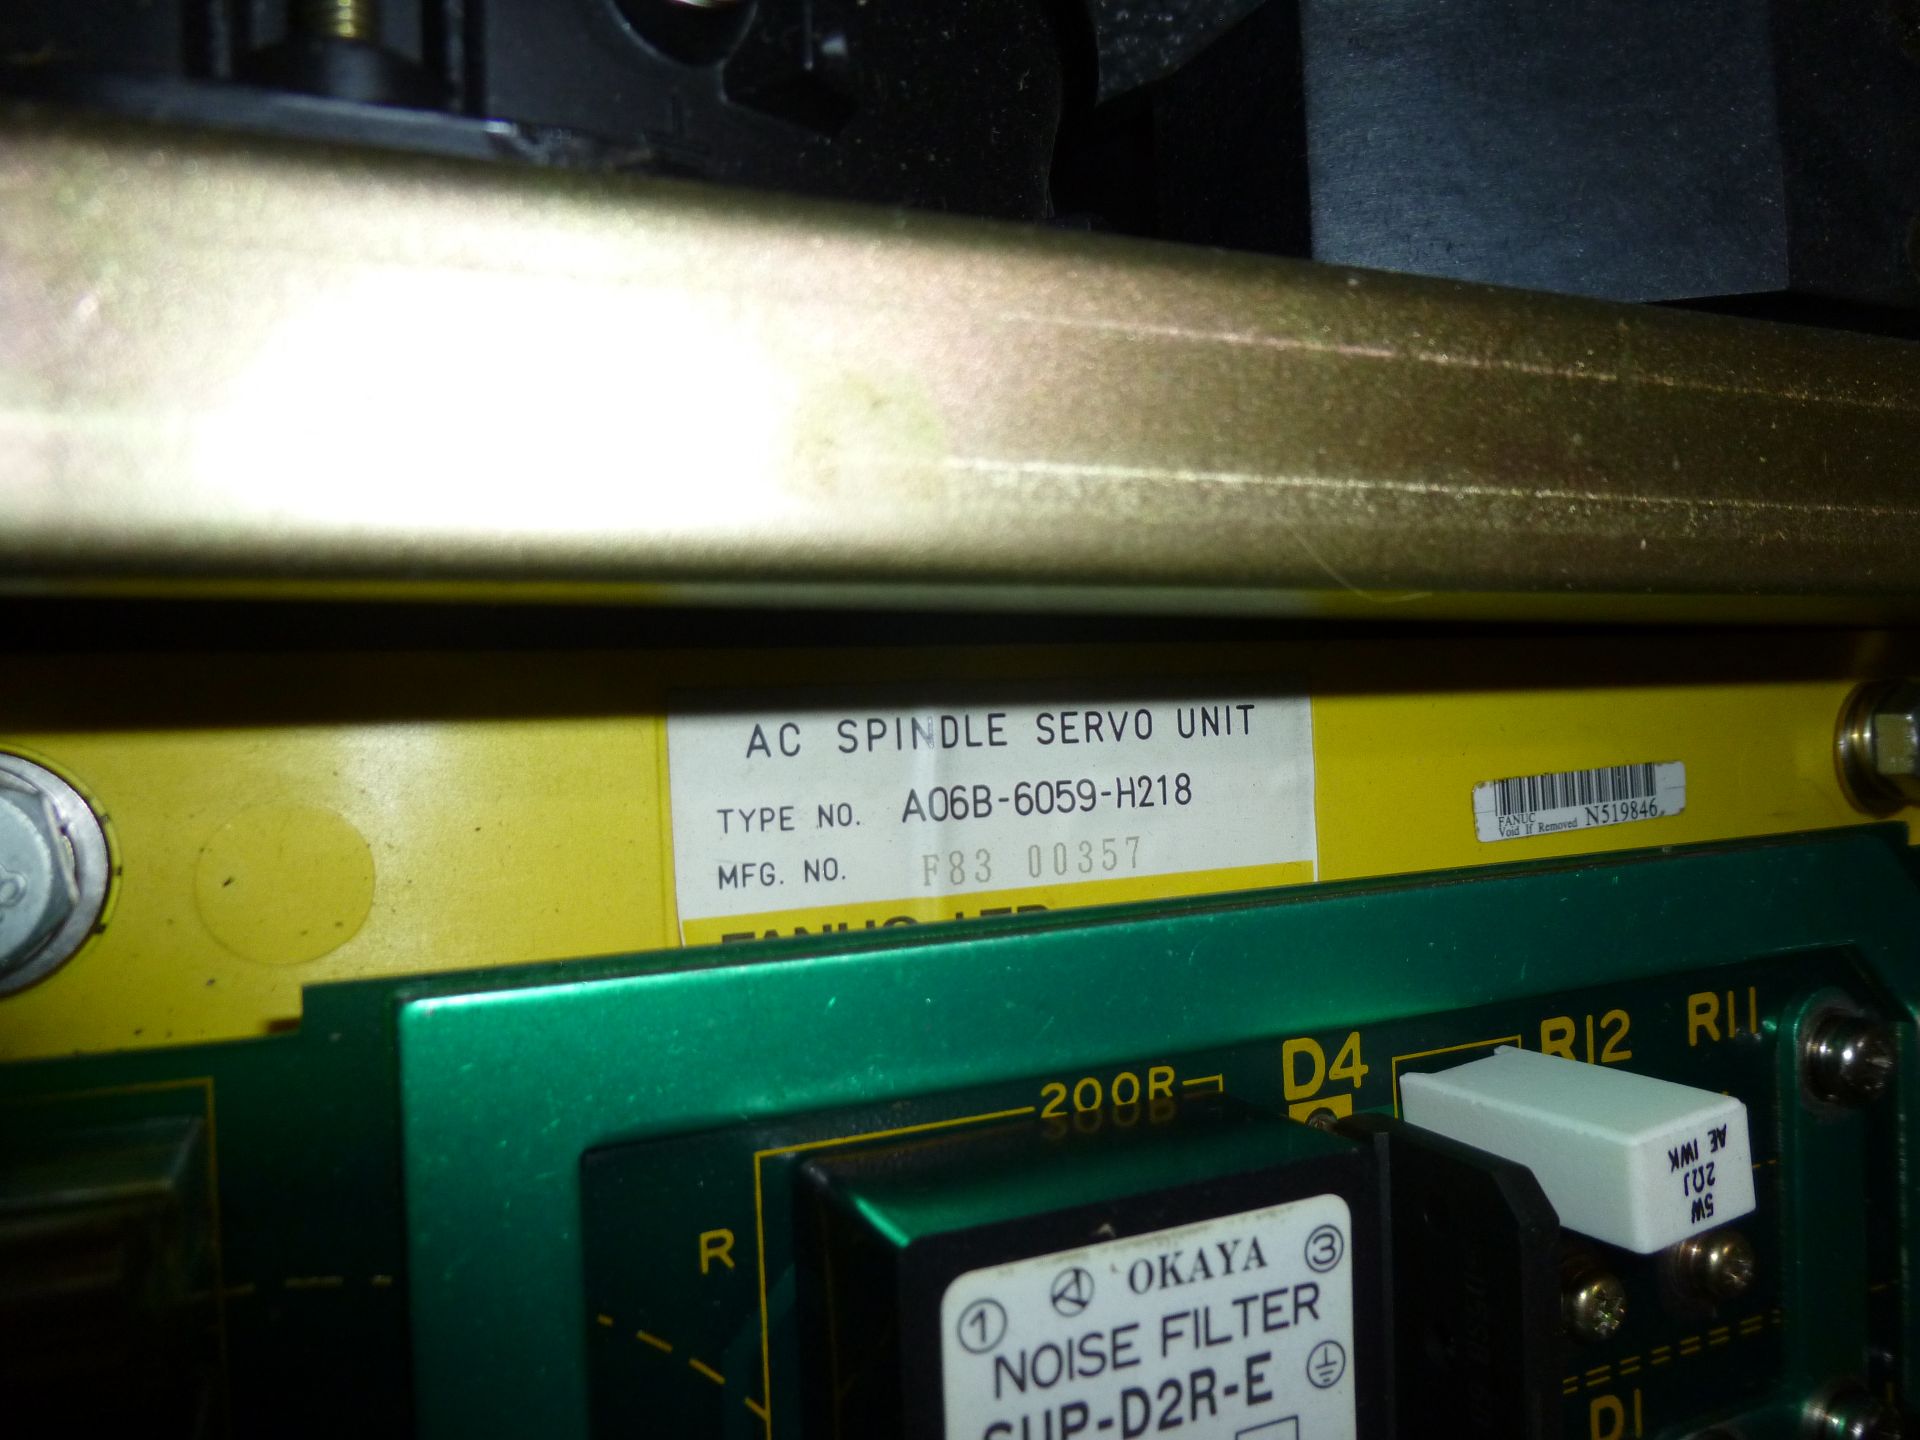 Fanuc AC spindle servo unit model A06B-6059-H218, appears new/unused in box, box shows wear, as - Image 4 of 4